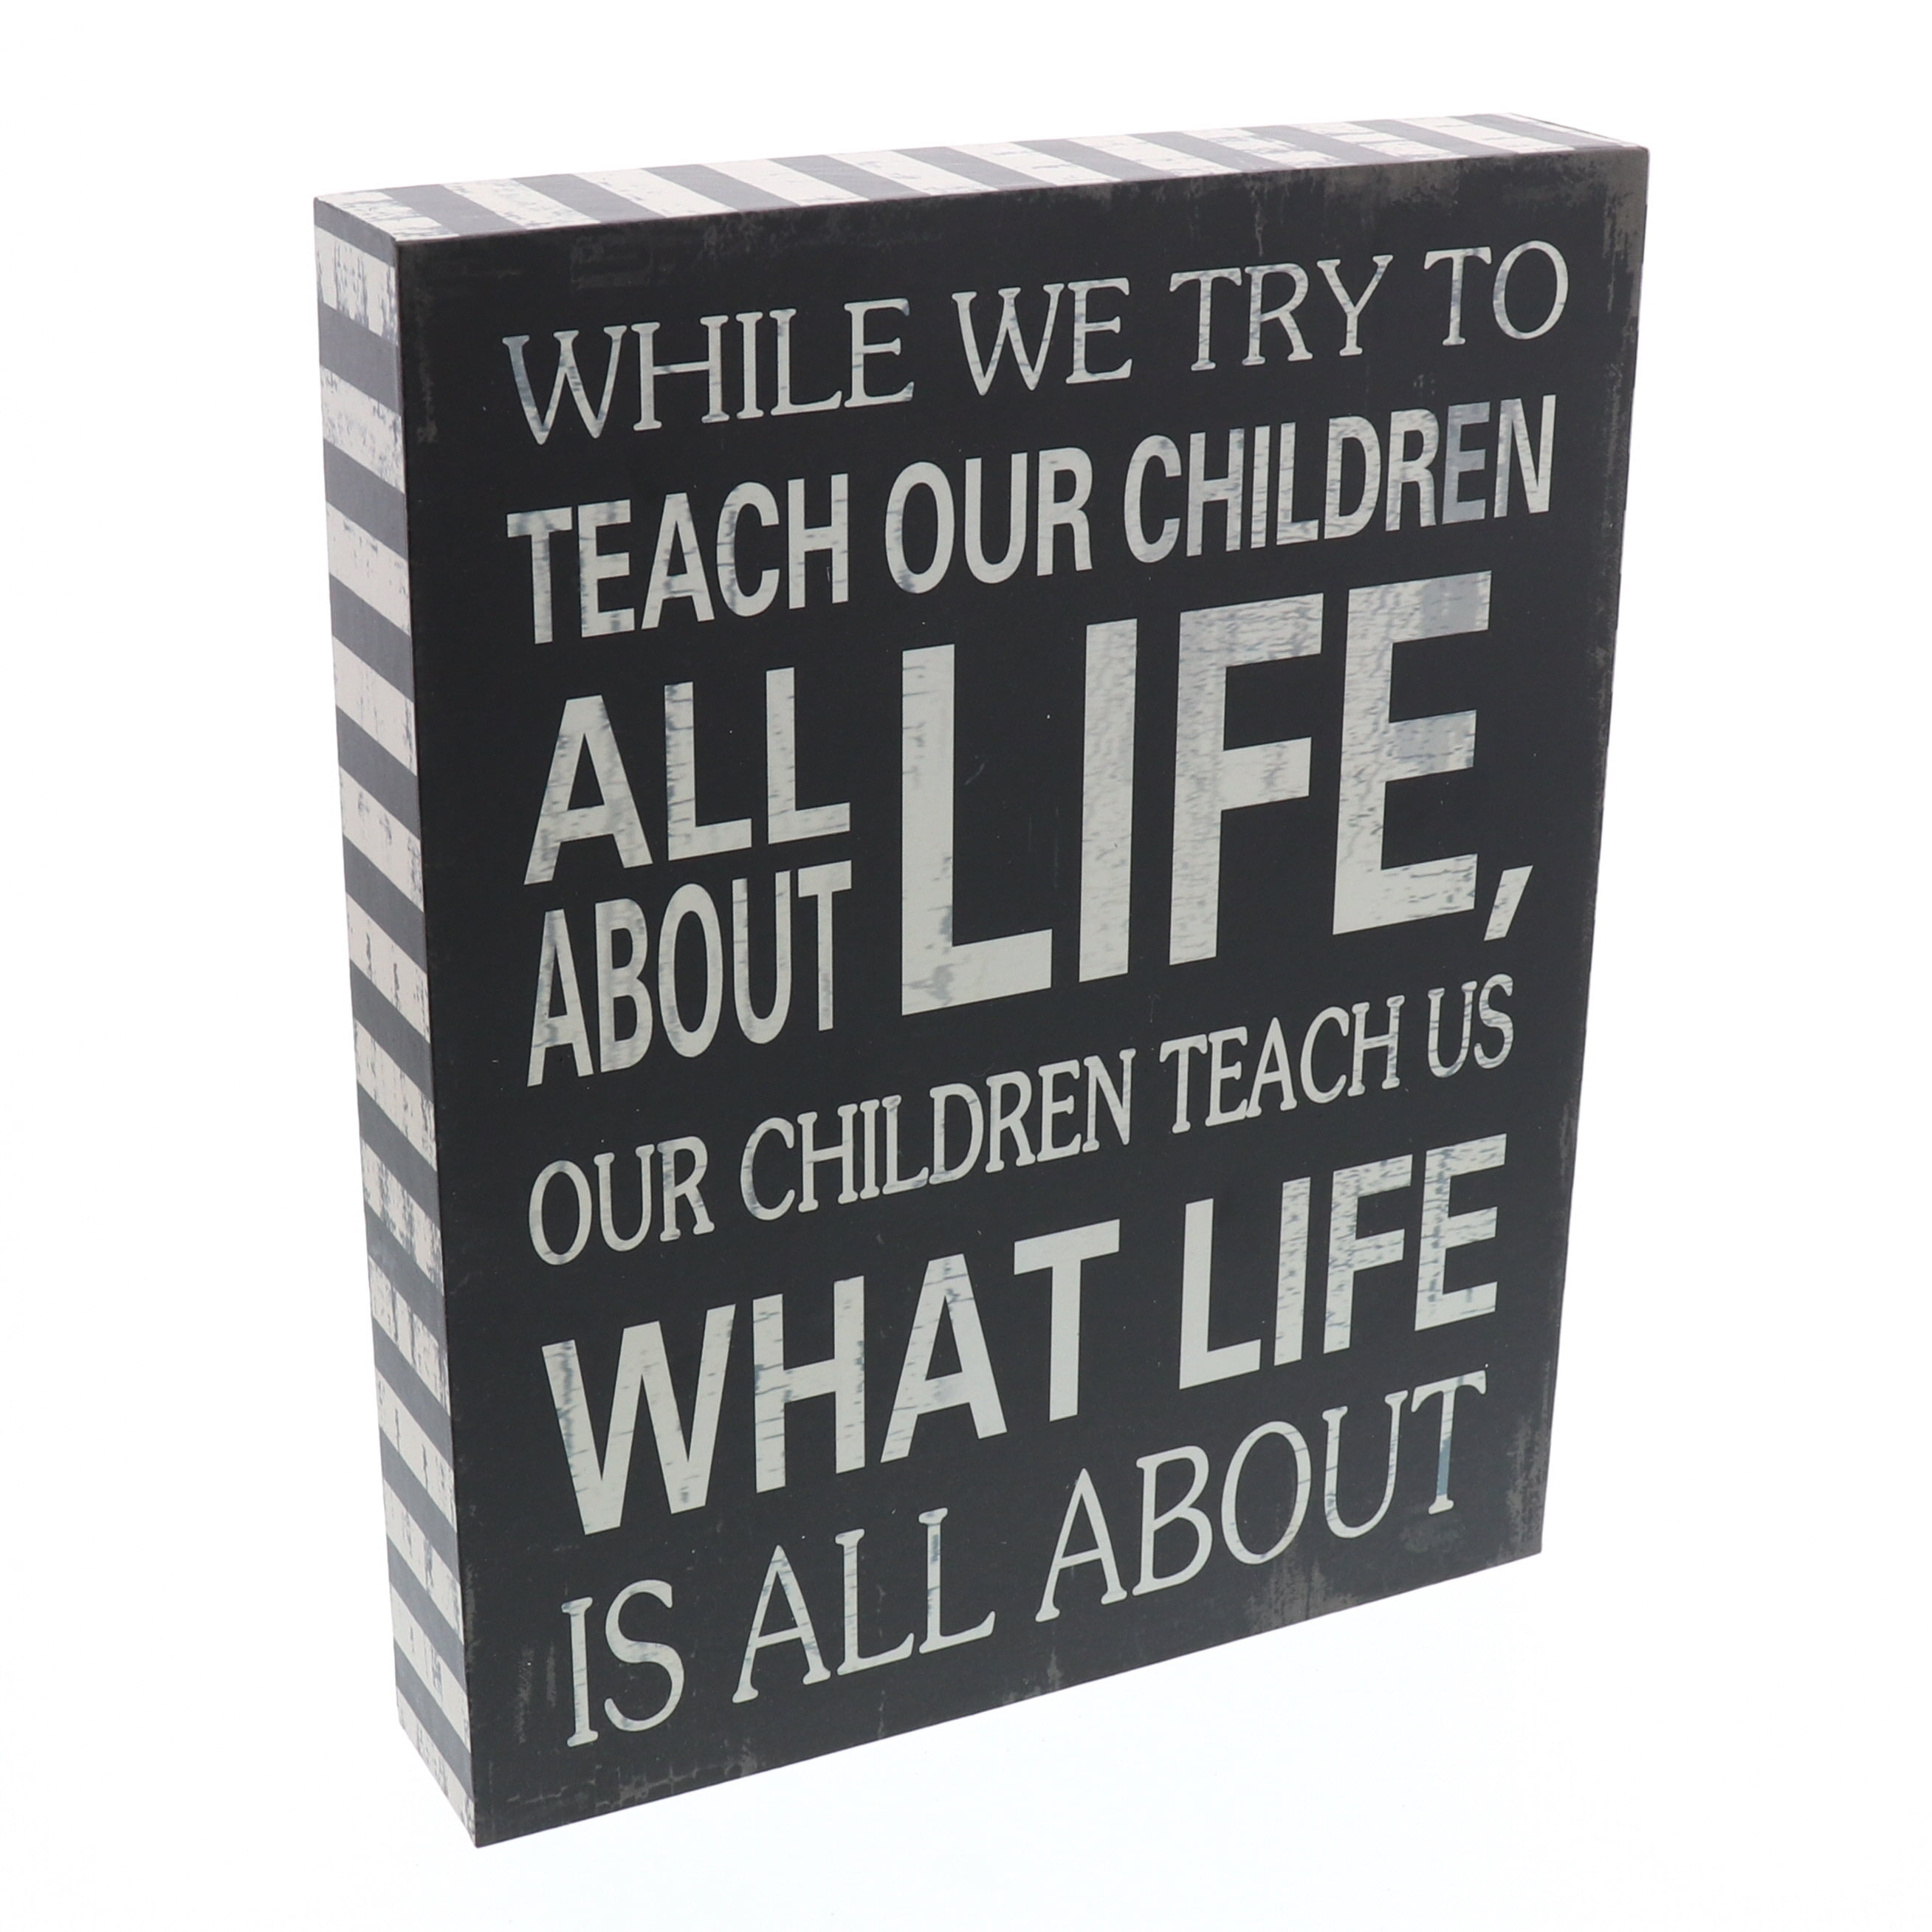 Photo 1 of Barnyard Designs Our Children Teach Us What Life Is All About Wooden Box Wall Art Sign, Primitive Country Farmhouse Home Decor Sign With Sayings 10 x 8